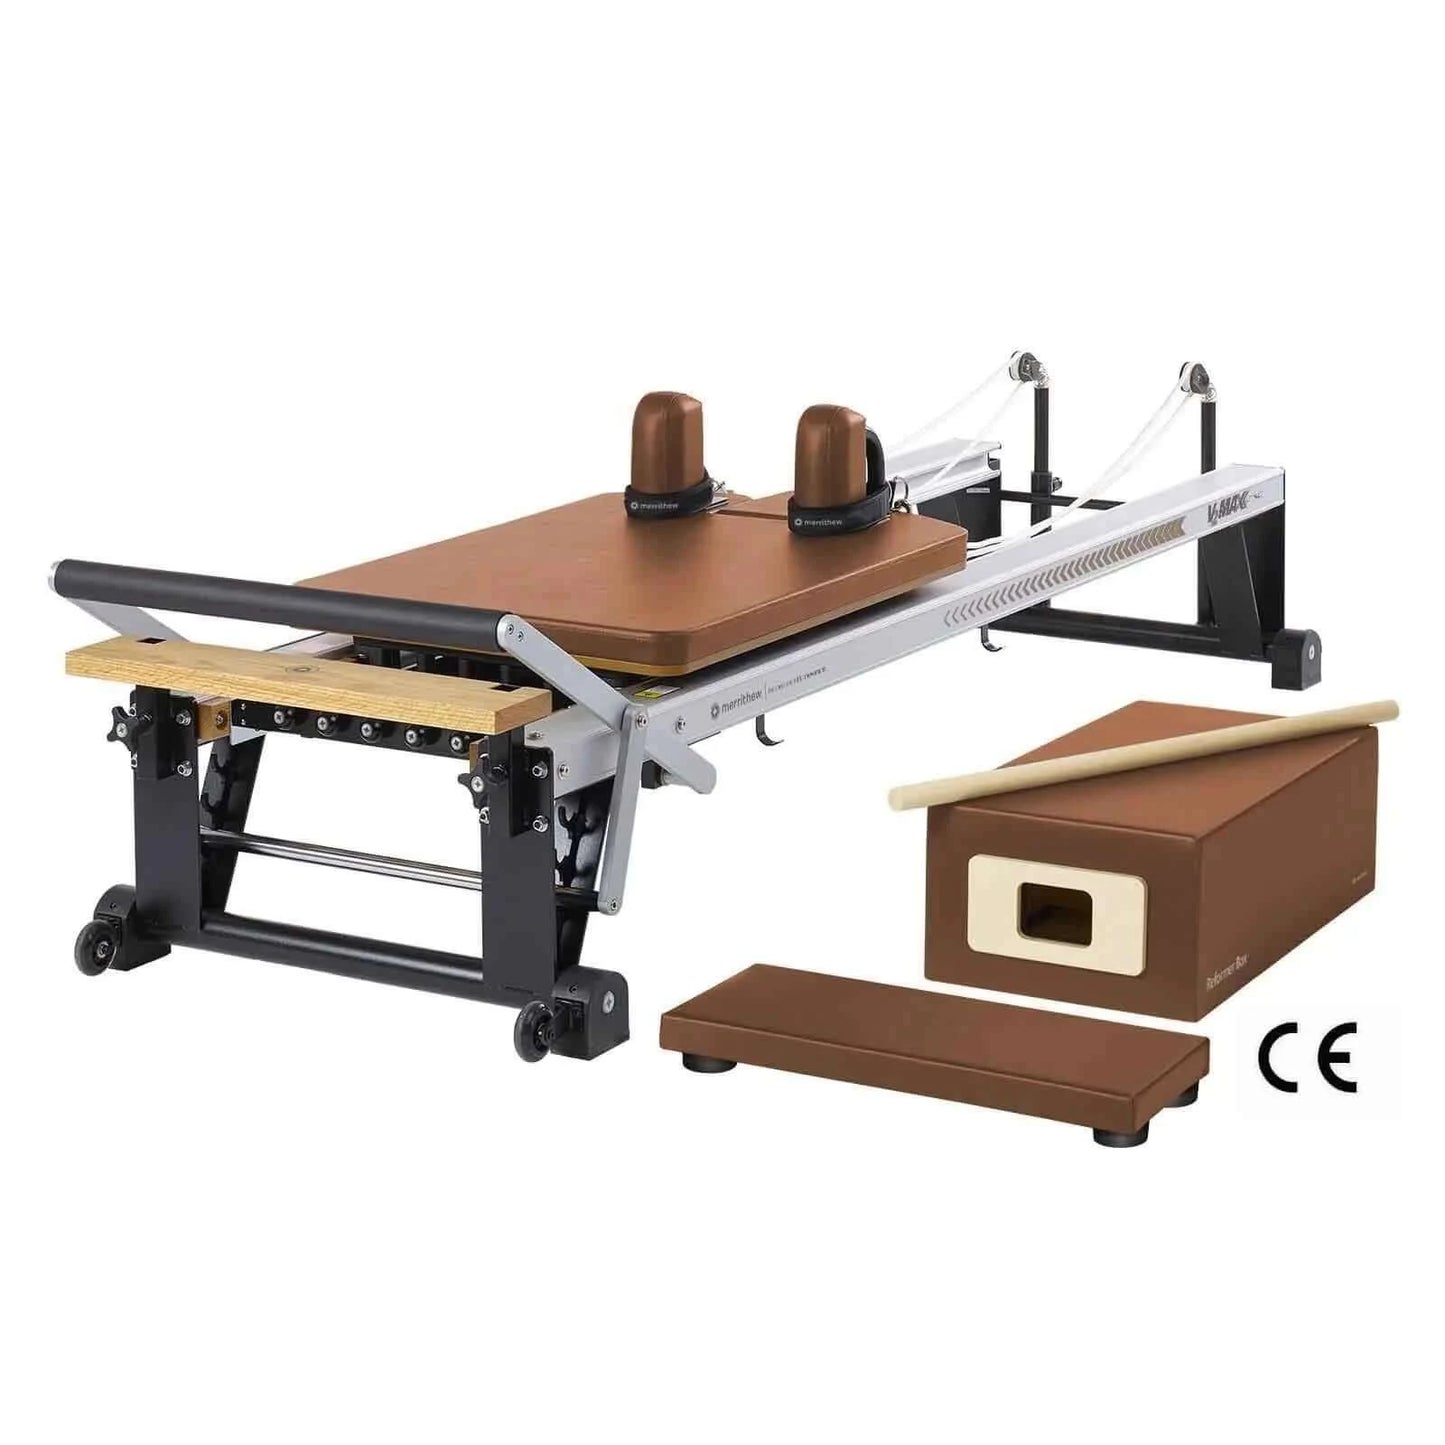 Red Truffle Merrithew™ Pilates V2 Max™ Reformer Bundle by Merrithew™ sold by Pilates Matters® by BSP LLC